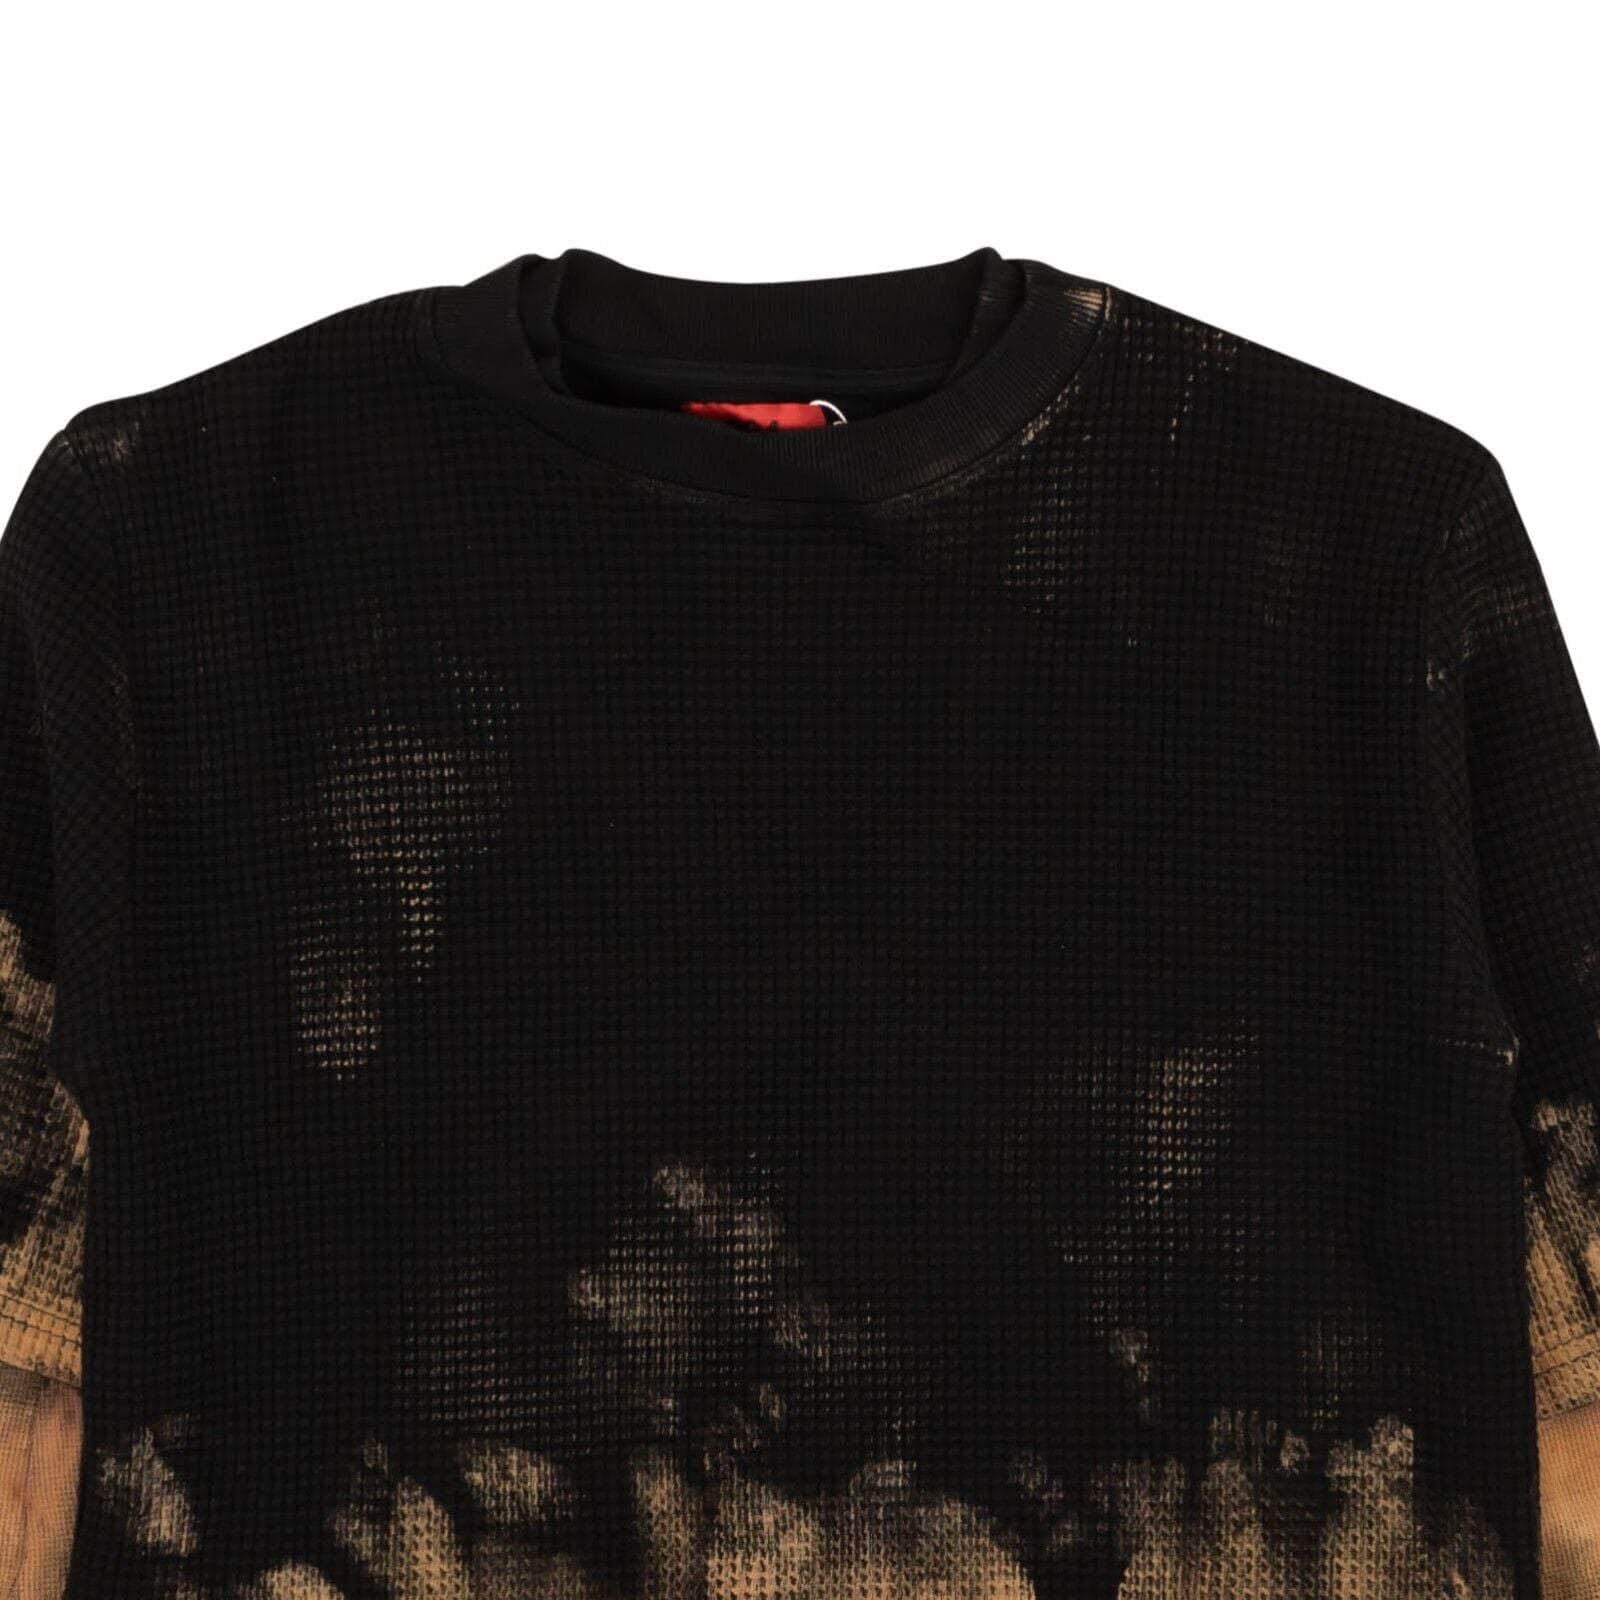 424 ON FAIRFAX 424-on-fairfax, channelenable-all, chicmi, couponcollection, gender-mens, main-clothing, mens-shoes, size-l, size-xl, size-xxxl, under-250 Black Waffle Knit Double Layer T-Shirt